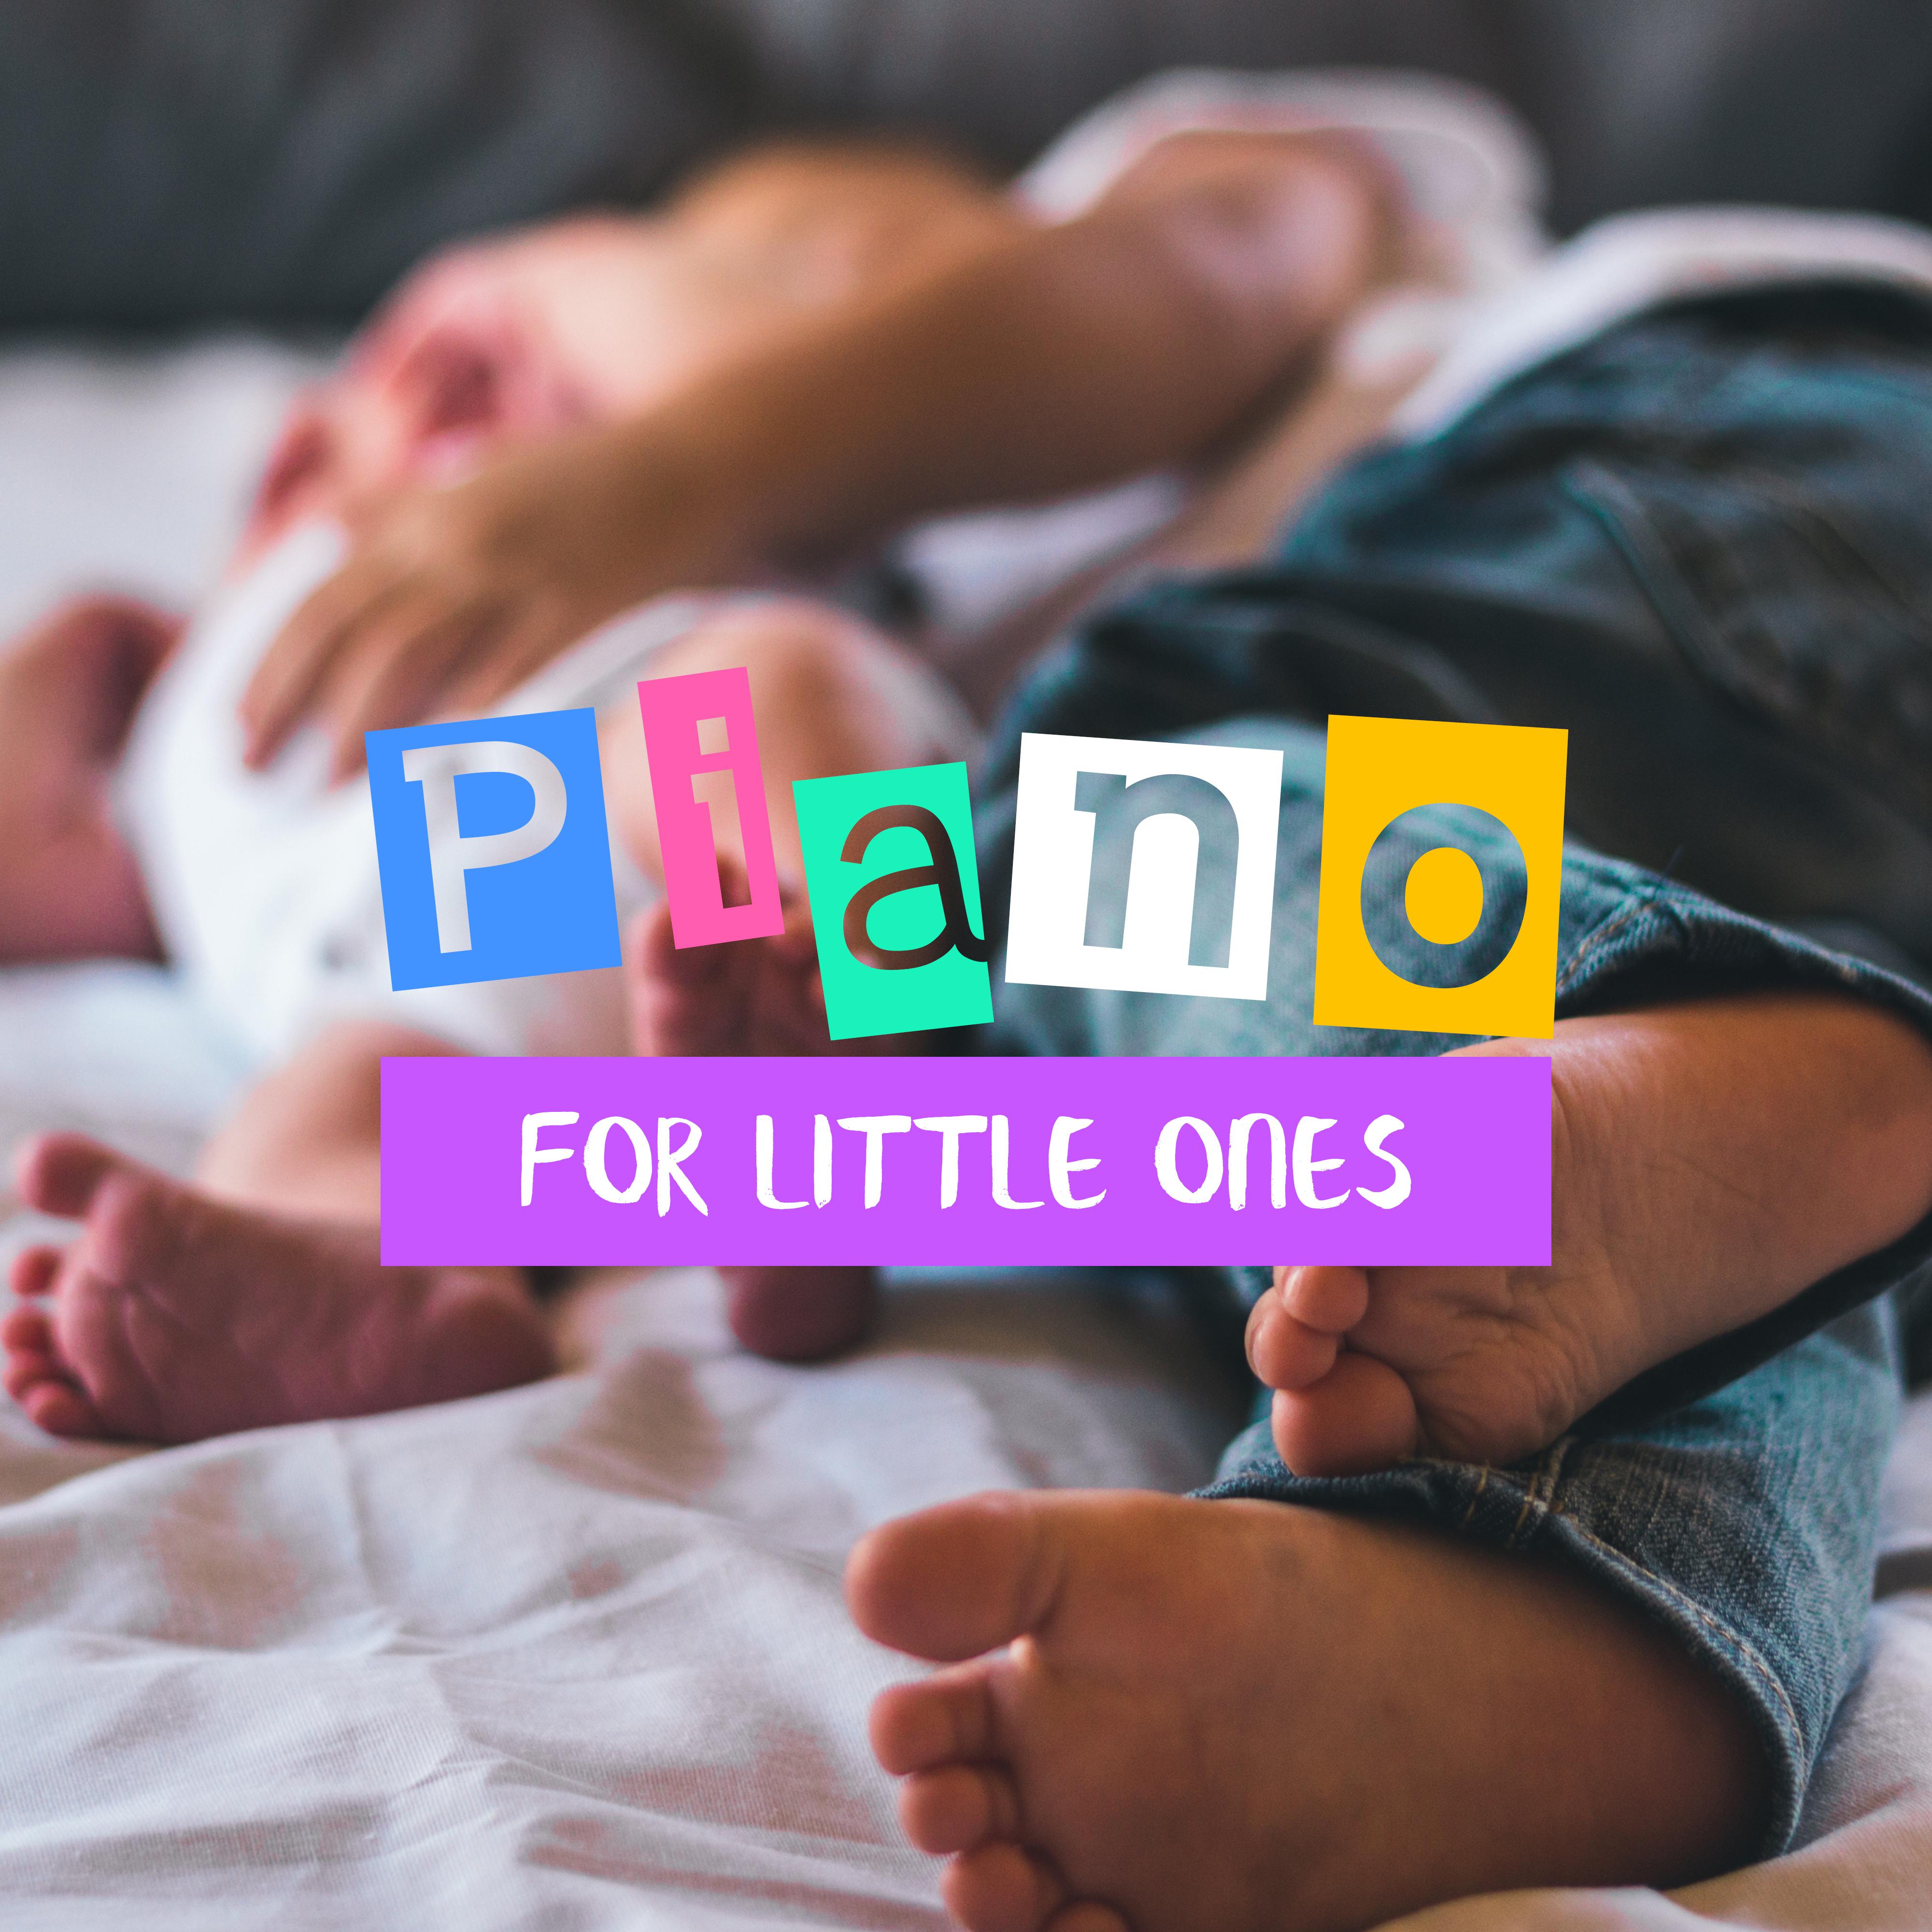 Piano for Little Ones - Quiet, Calm and Melancholic Music for Childrens (to sleep, take a nap, relax, rest and listen)